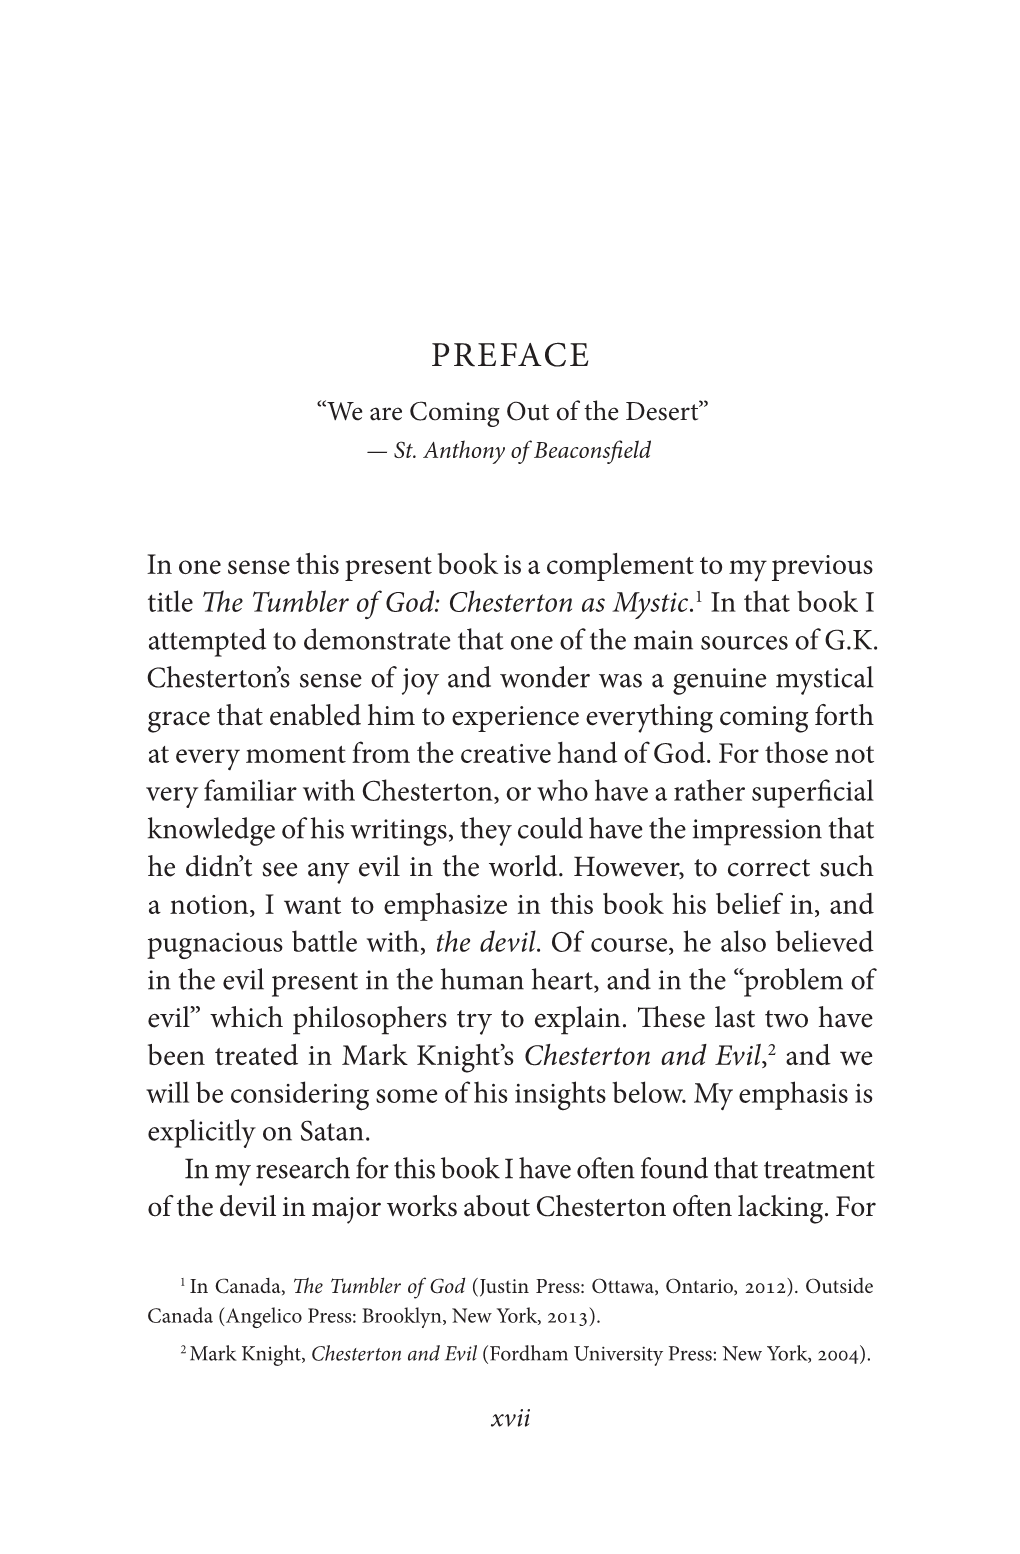 PREFACE “We Are Coming out of the Desert” — St